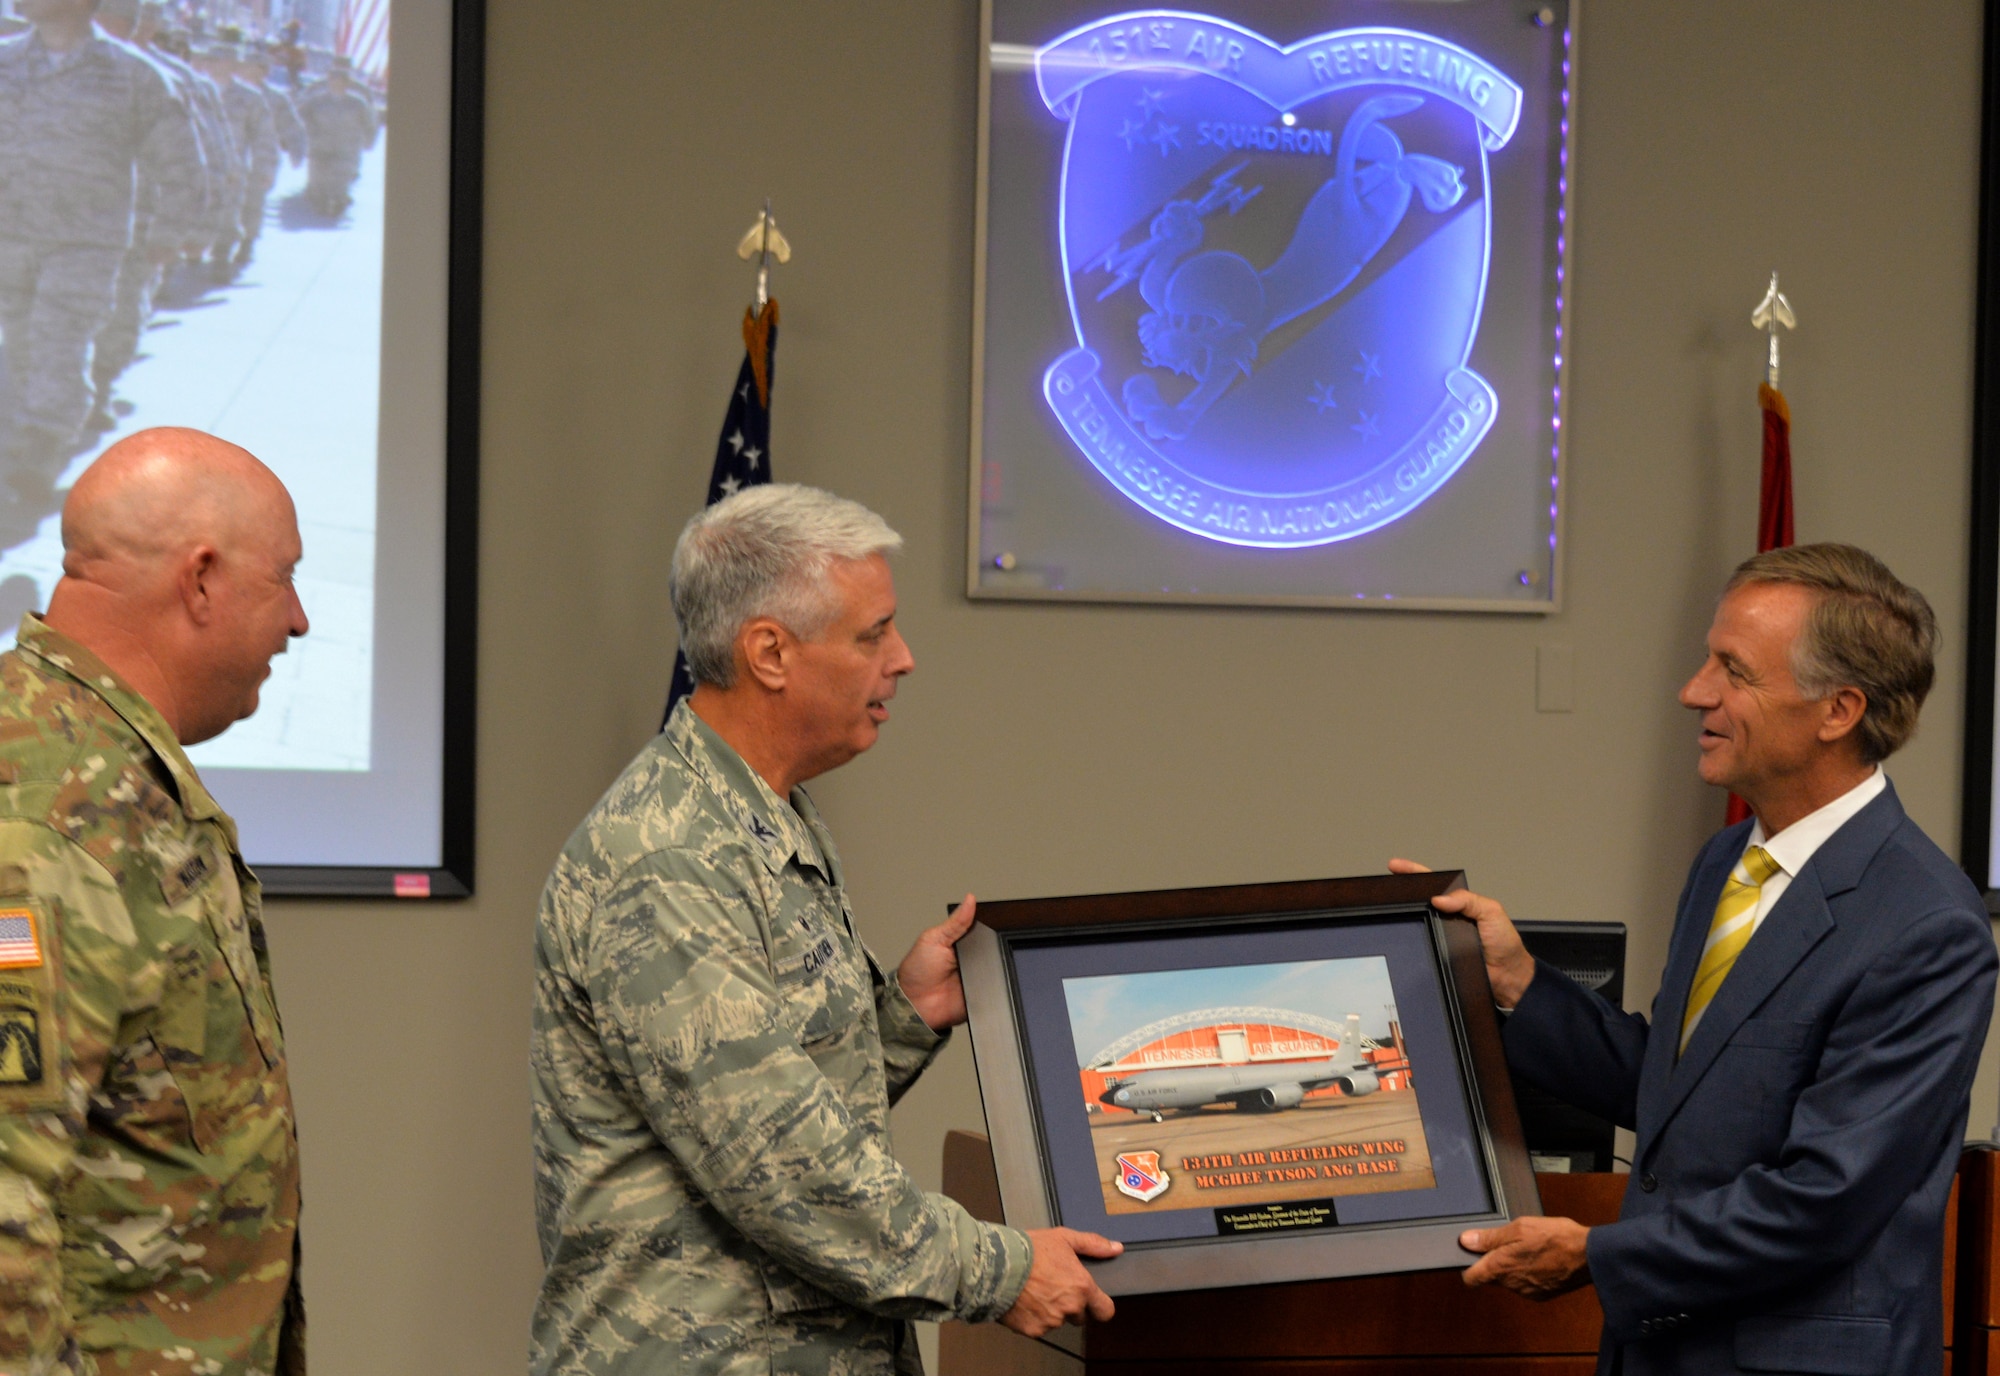 Maj. Gen. Terry M. Haston, the Adjutant General of Tennessee National Guard and Col. Thomas Cauthen, 134th Air Refueling Wing Commander present a 134th ARW picture to Tennessee Governor Bill Haslam while visiting the 134th Operations Group July 27, 2016 at McGhee Tyson ANG Base, Knoxville, Tenn. (U.S. Air National Guard photo by Staff Sgt. Daniel Gagnon)